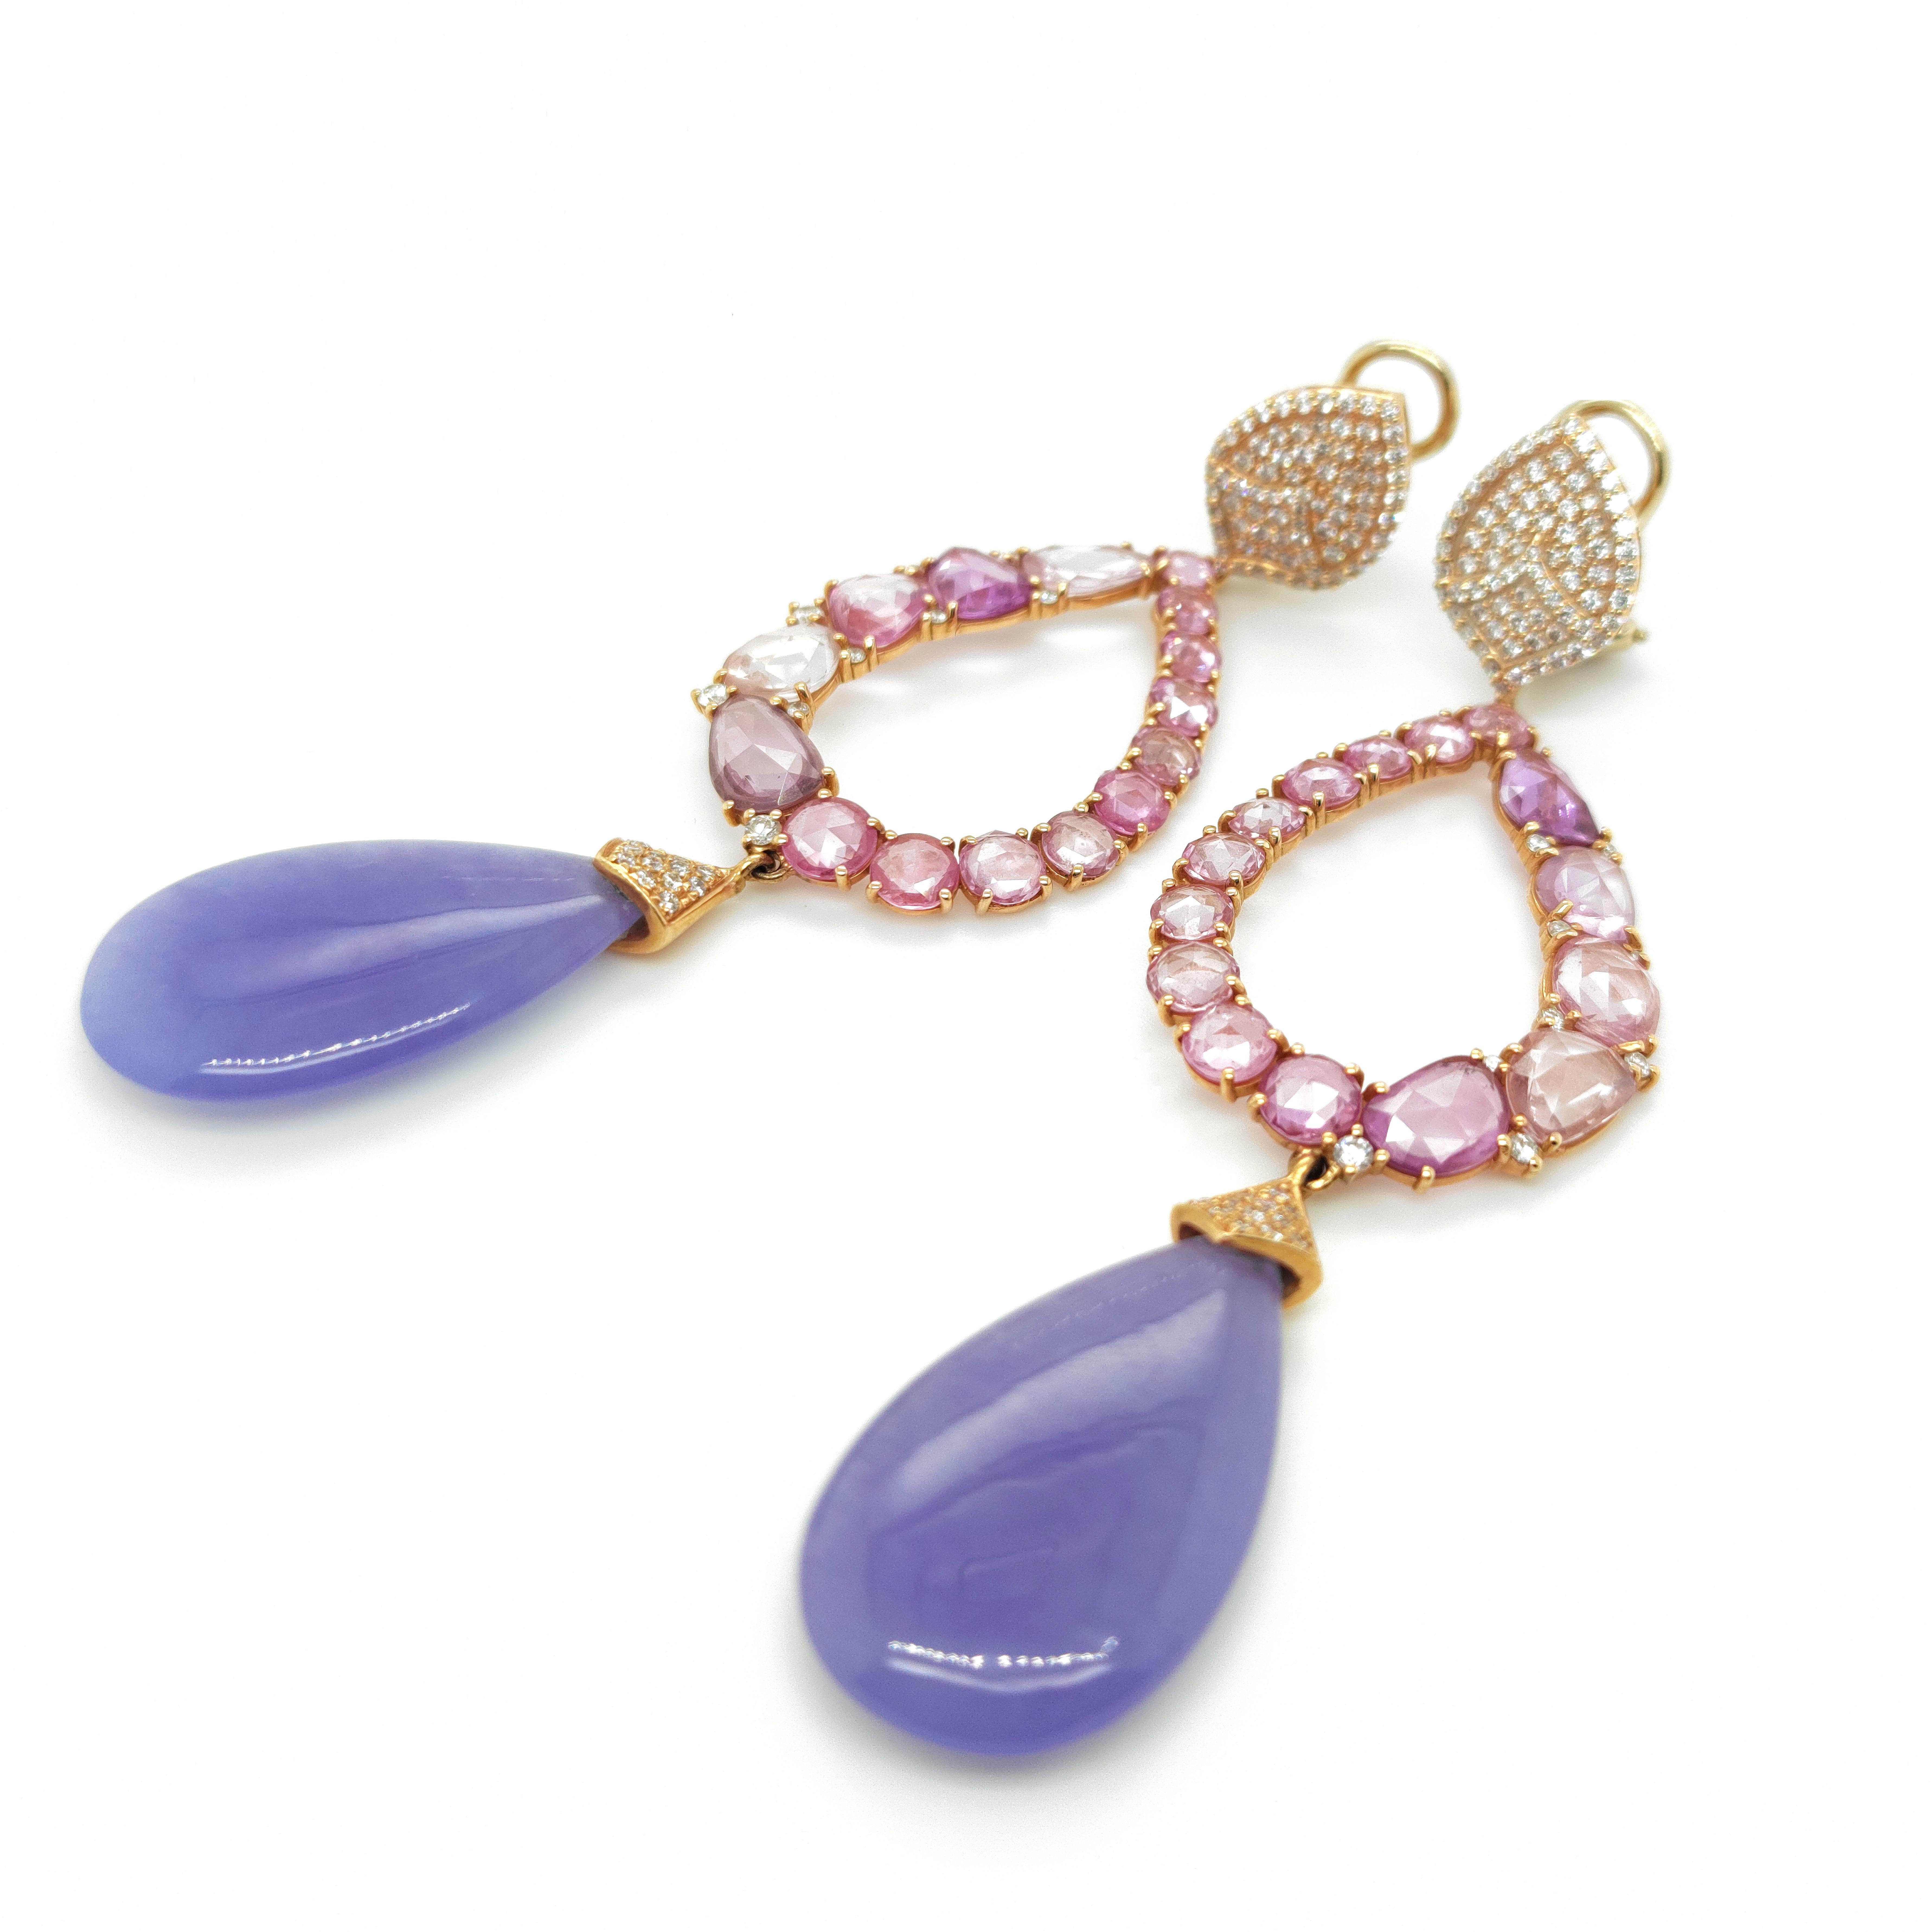 Dazzle in the ethereal beauty of our Earrings Arcobaleno, a mesmerizing fusion of Jade, Sapphires, and Diamonds. Crafted to captivate, these earrings are a symphony of colors, with delicate Lavander Jade stones reflecting a spectrum of hues. The